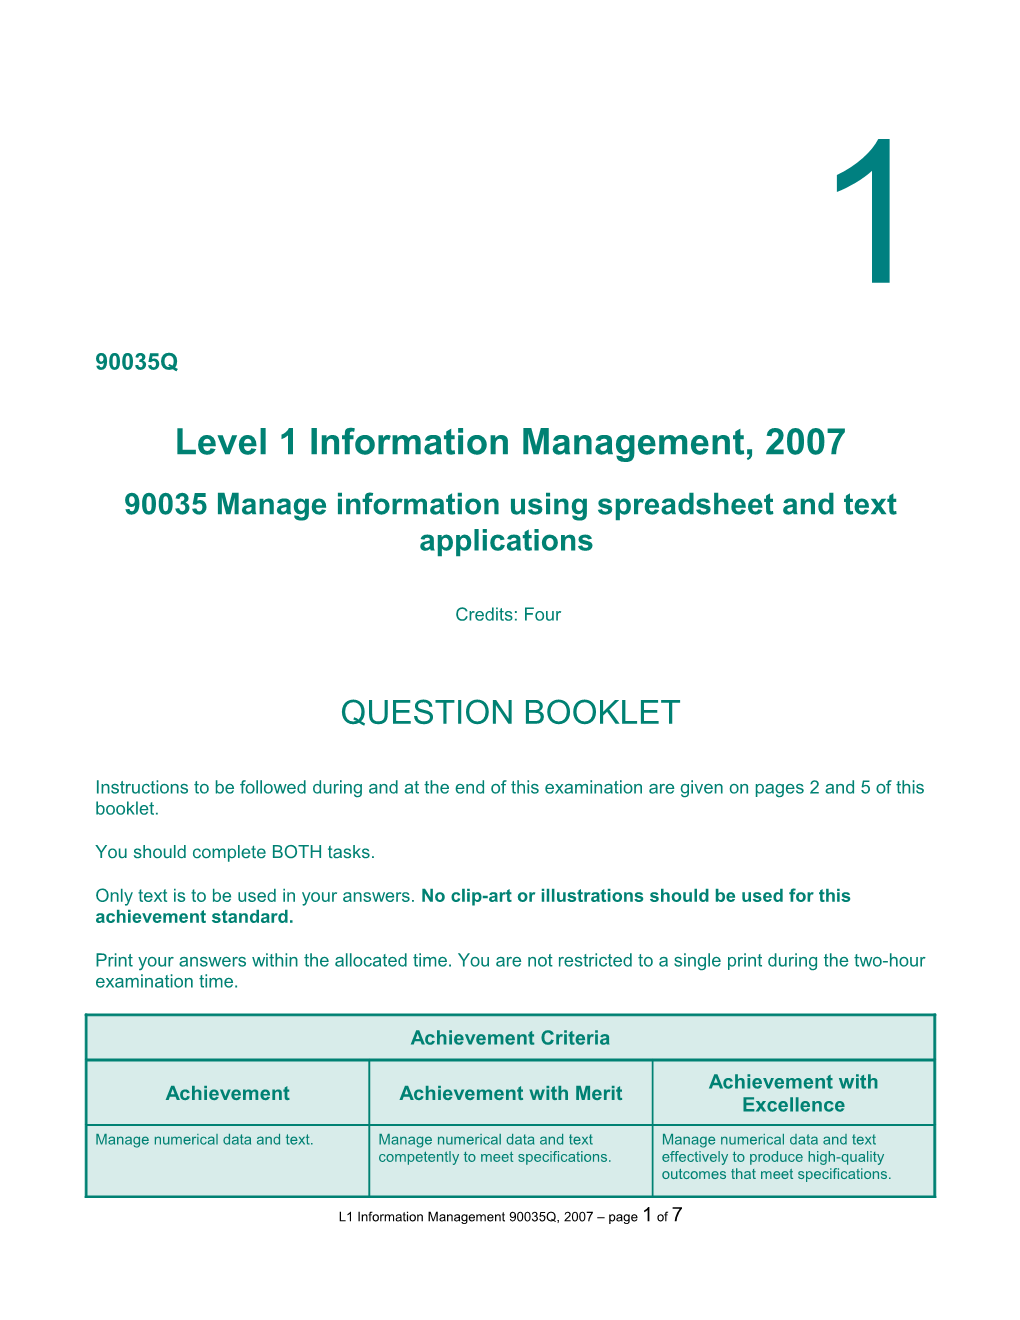 90035 Manage Information Using Spreadsheet and Text Applications